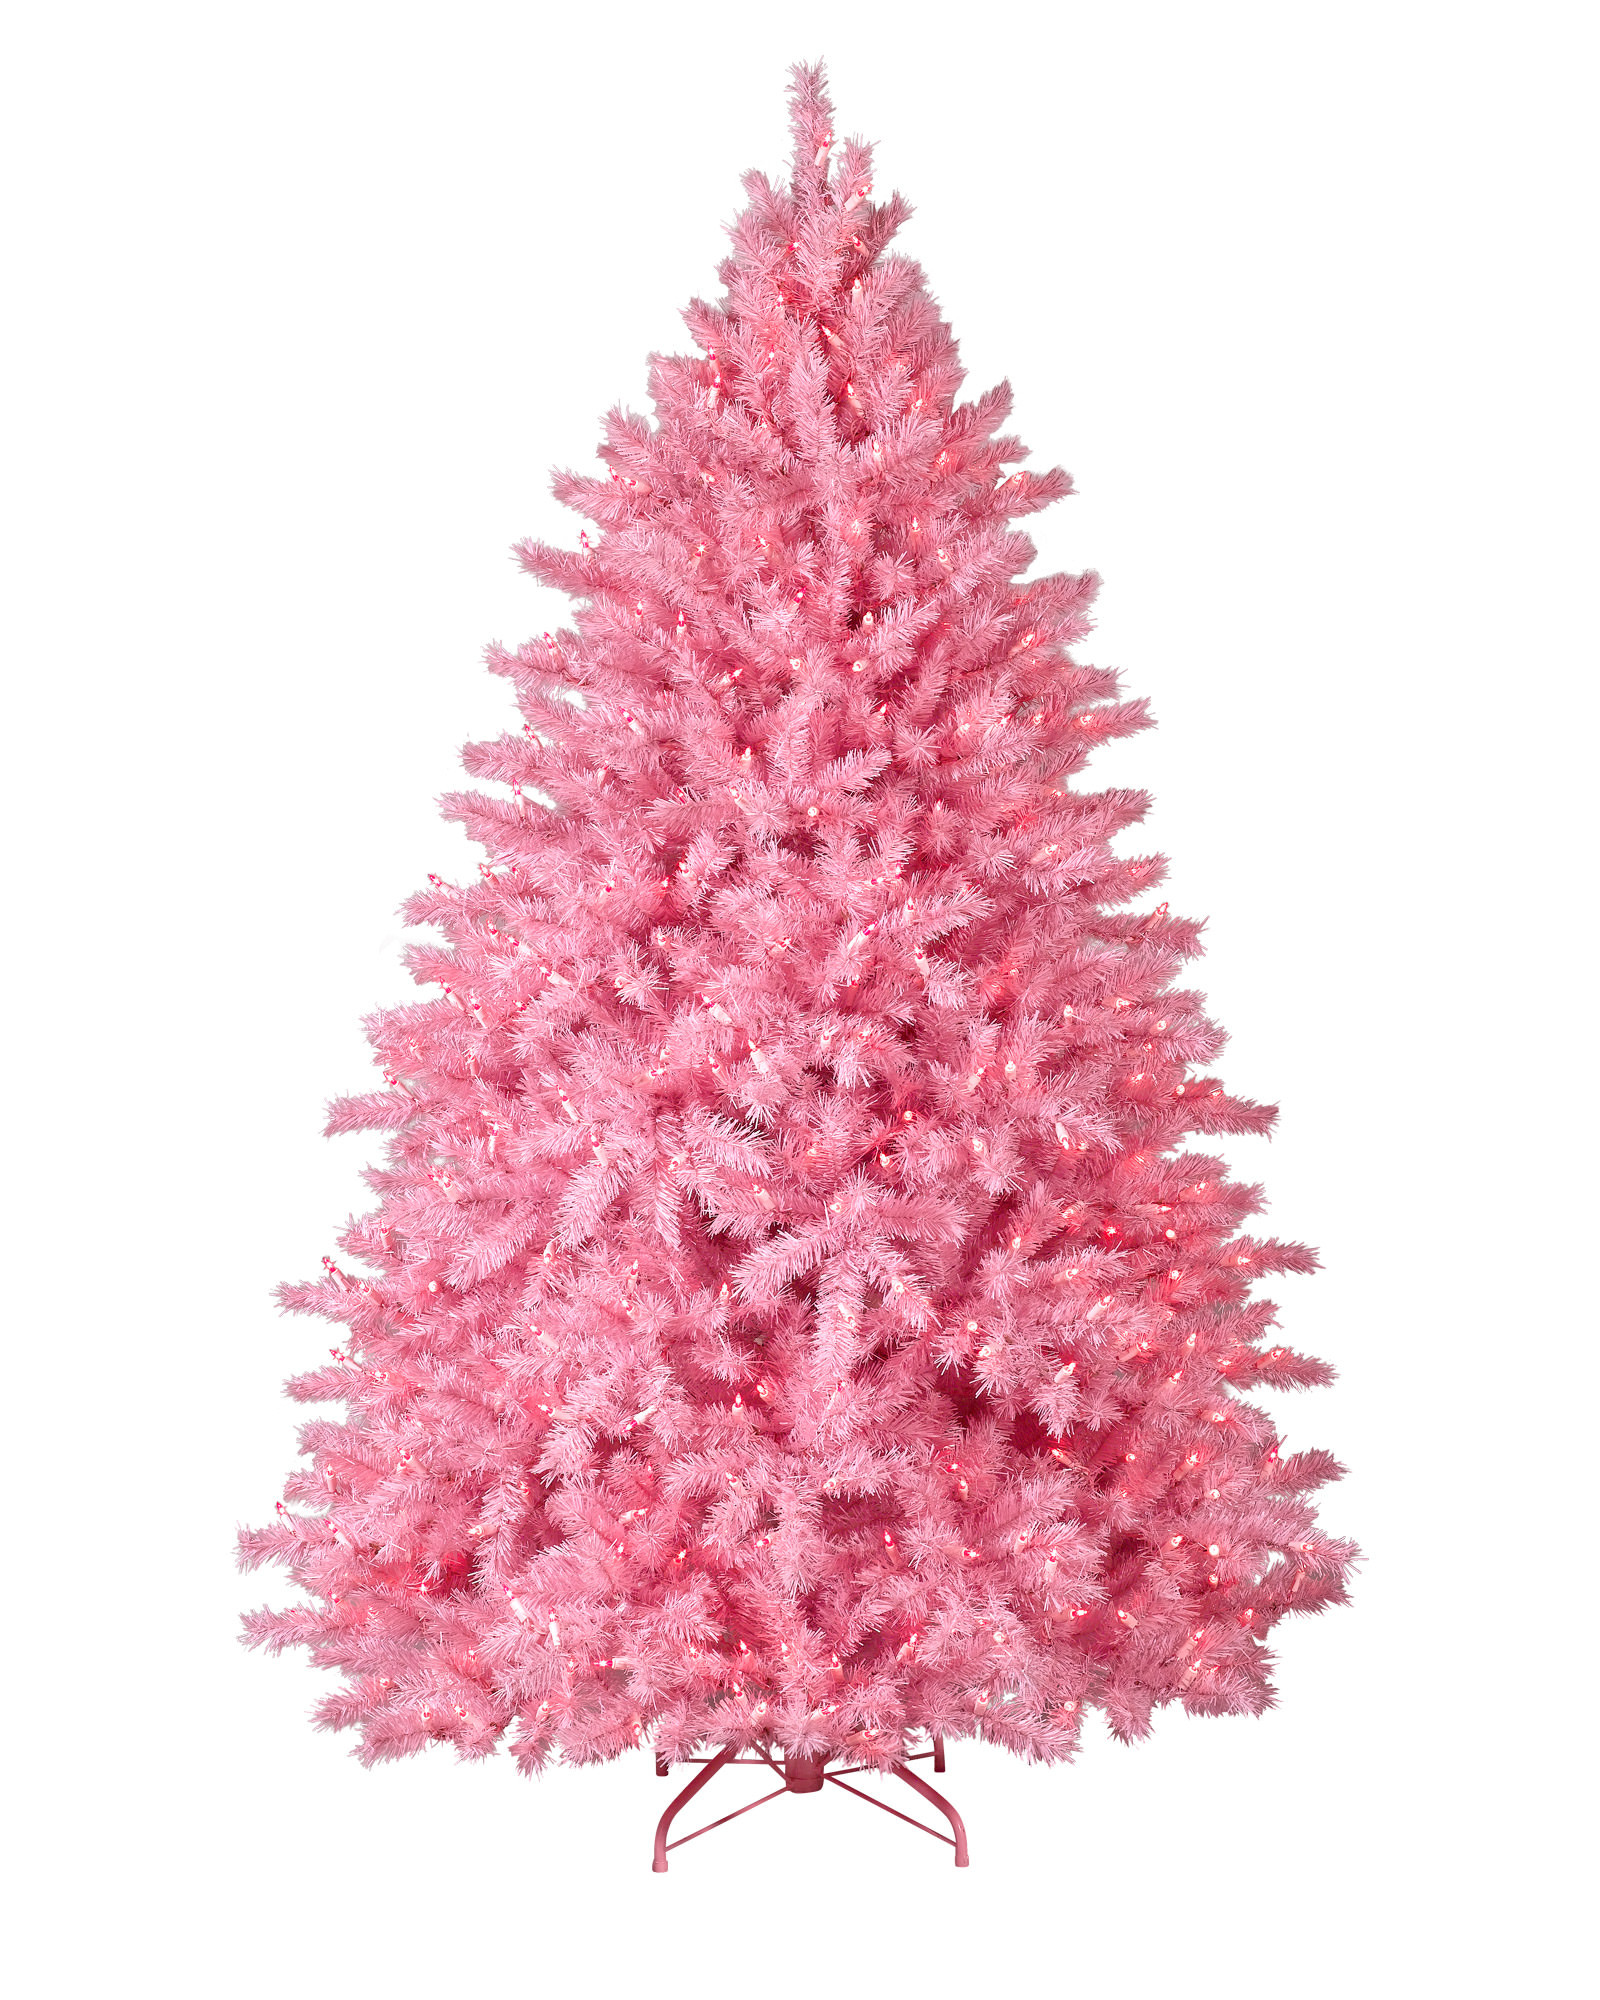 Pretty In Pink Christmas Tree Treetopia Artificial Pinkchristmastree Rollover To Zoom. boys bedroom decorating ideas